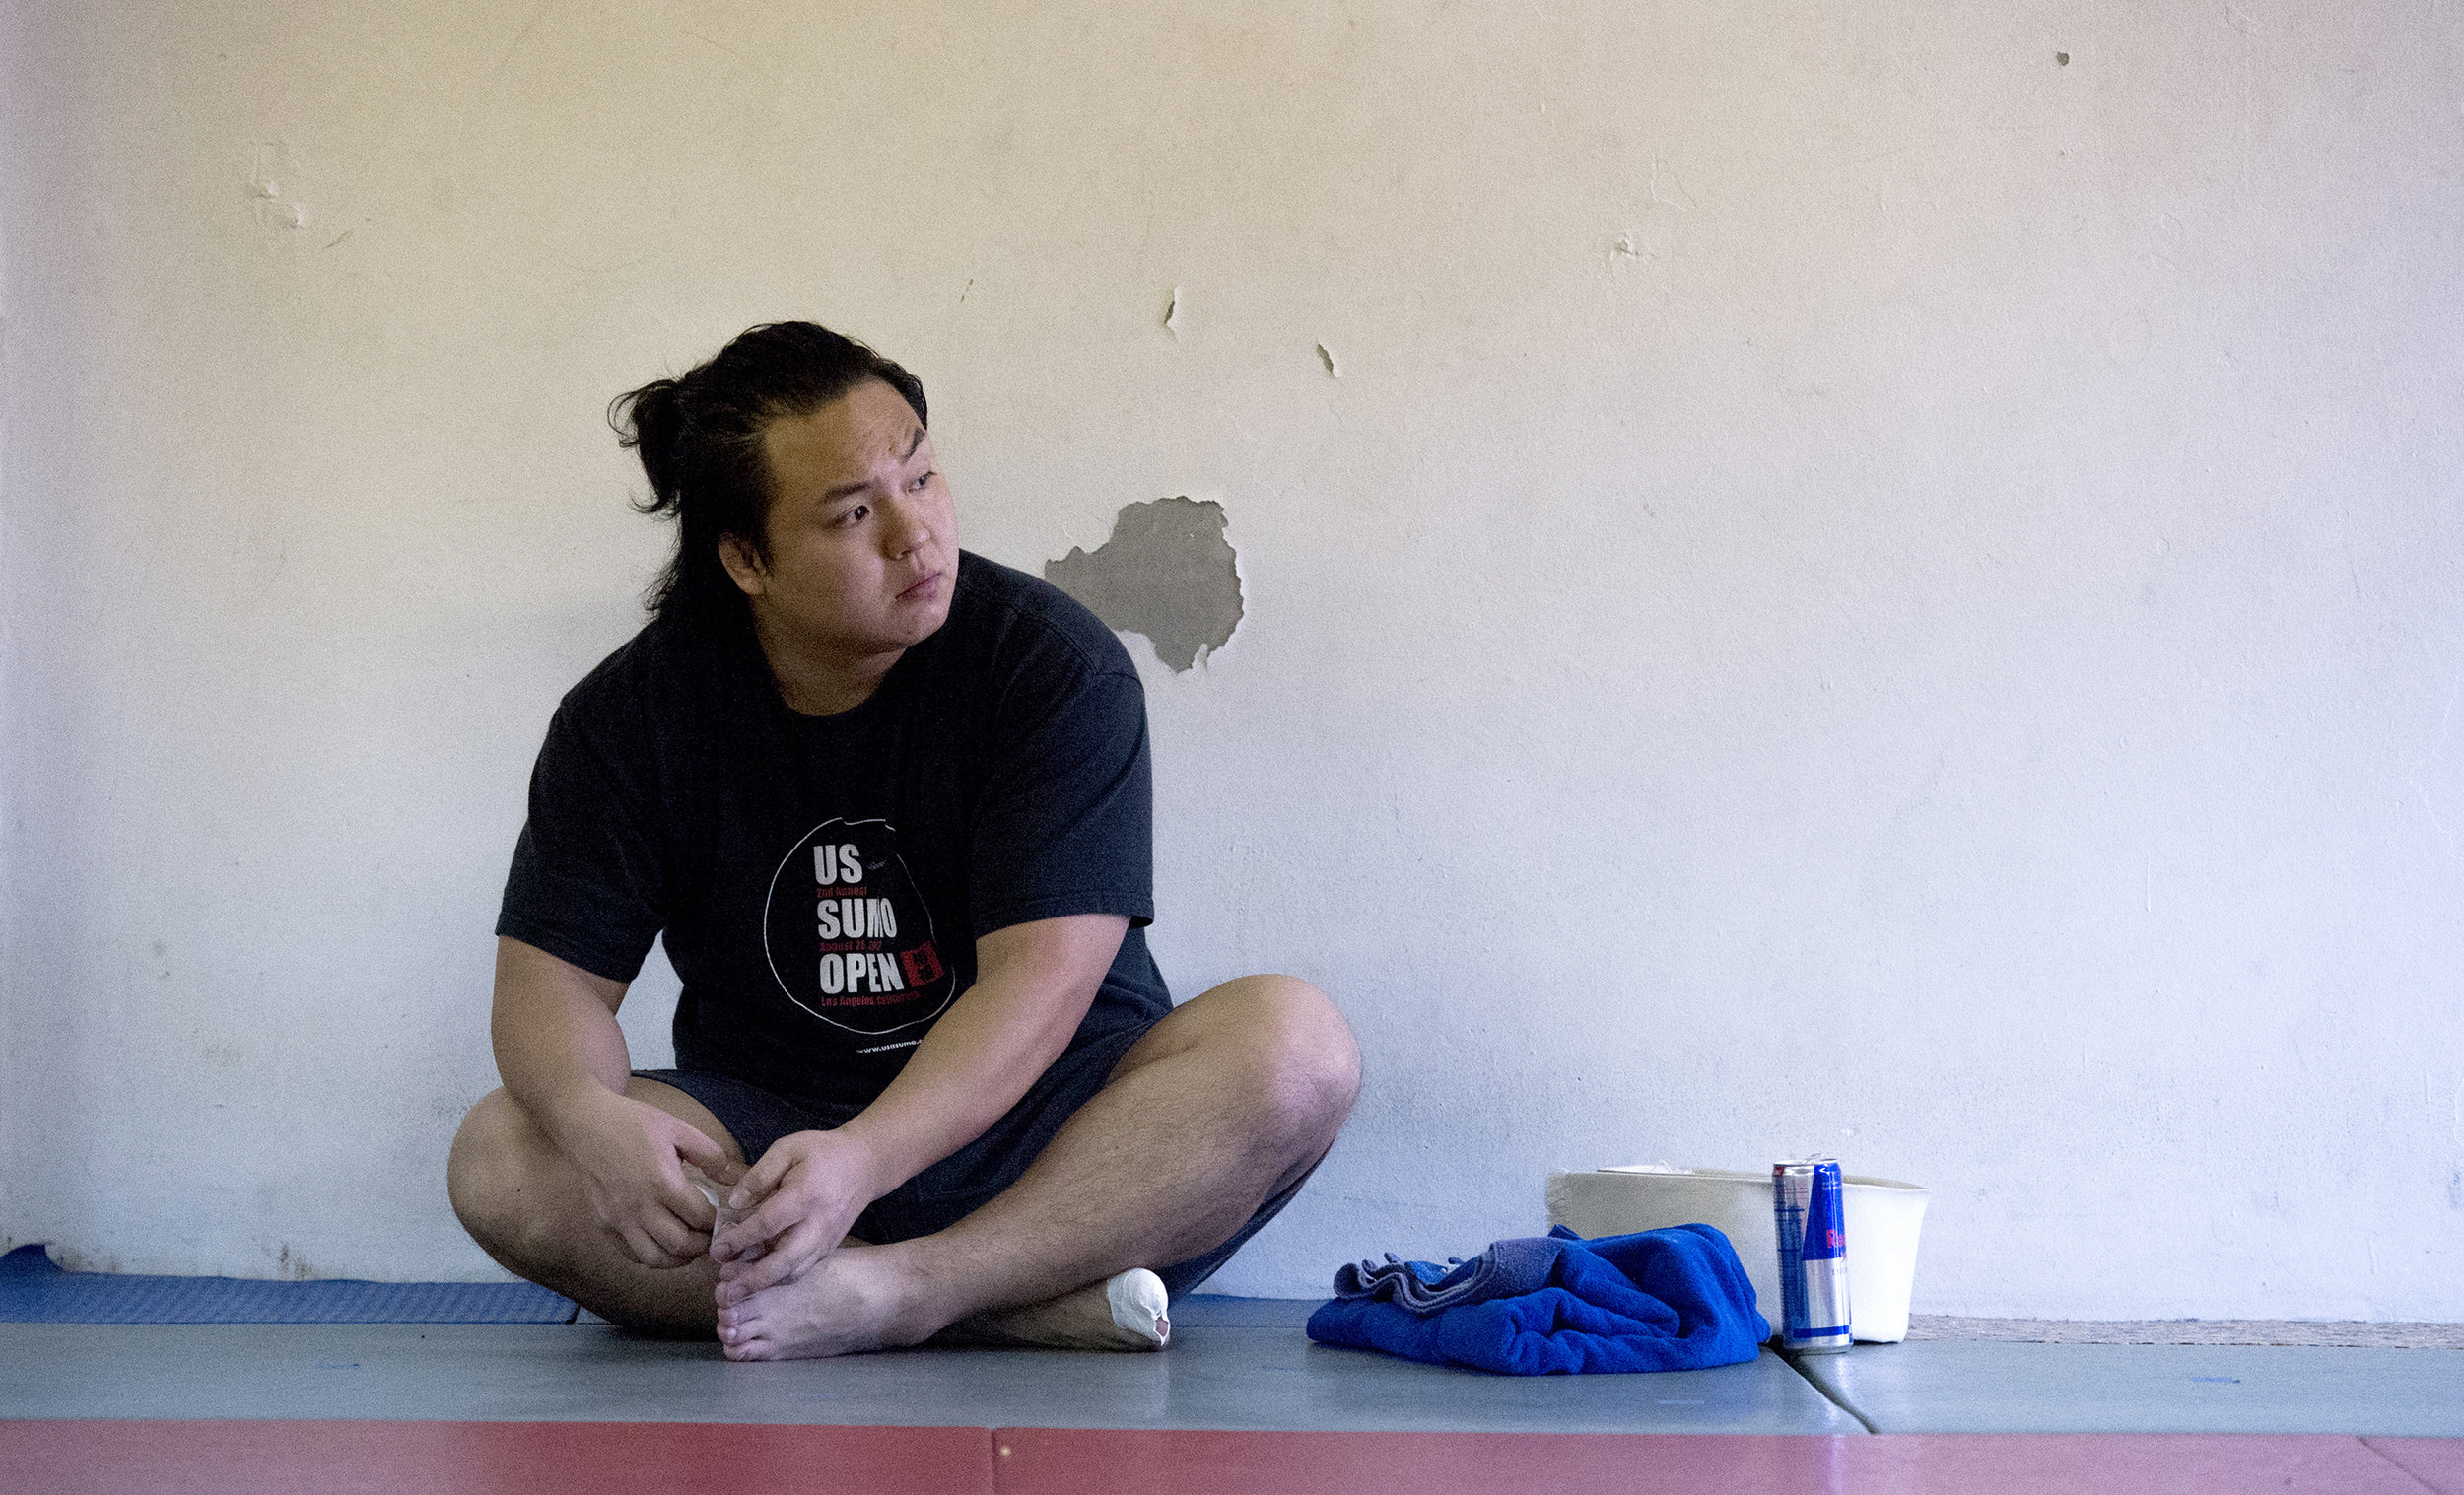  Takeshi Amitani, of Japan, tapes up his toes before a sumo wrestling practice in Carson Sunday, April 8, 2018.  Amitani coaches and trains sumo wrestling and is a 5-time Japanese National University Champion, he also was the undefeated Openweight ch